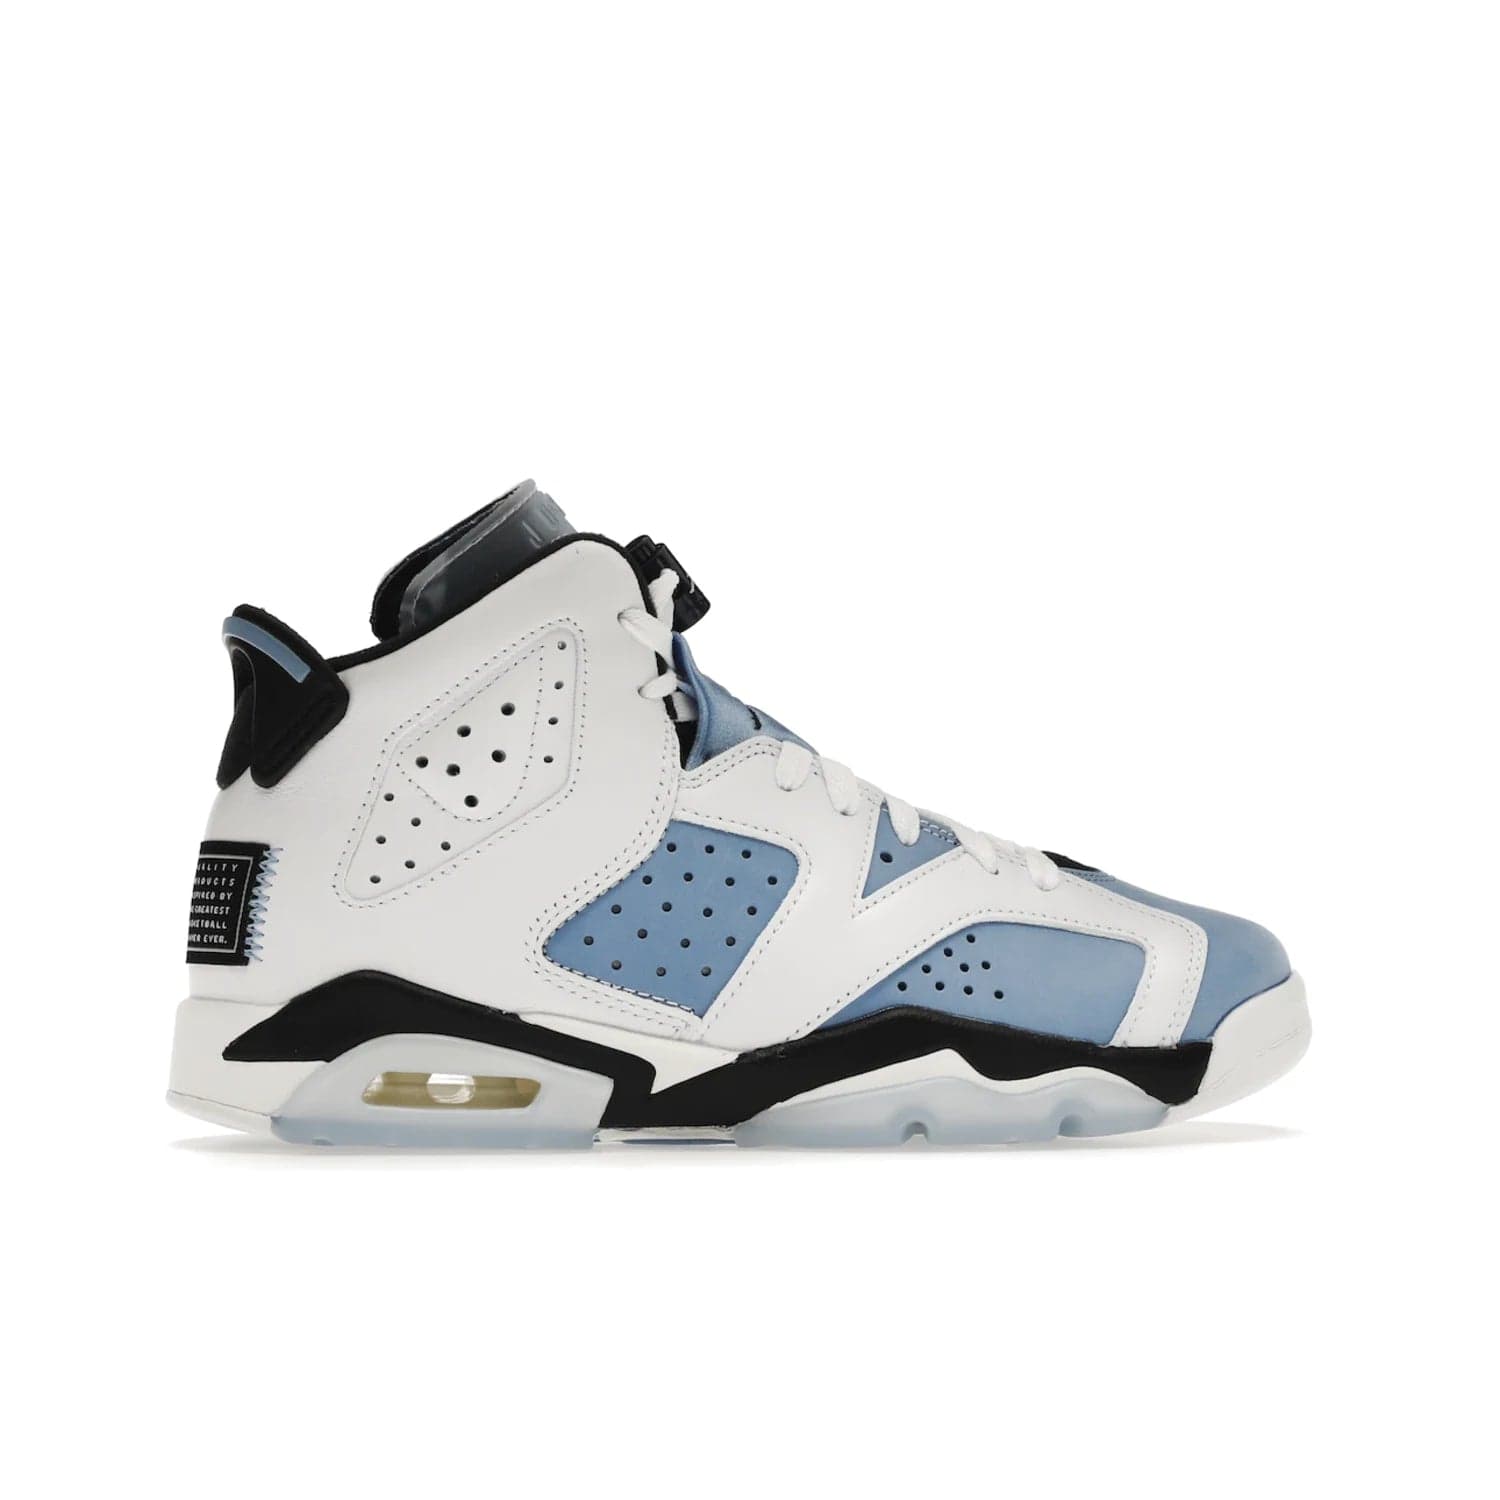 Jordan 6 Retro UNC White (GS) - Image 36 - Only at www.BallersClubKickz.com - Air Jordan 6 Retro UNC White GS: Michael Jordan alma mater, UNC Tar Heels, featuring colorway, nubuck, leather, Jumpman branding and a visible Air unit. Translucent blue/white outsole, perfect for completing sneaker rotation.